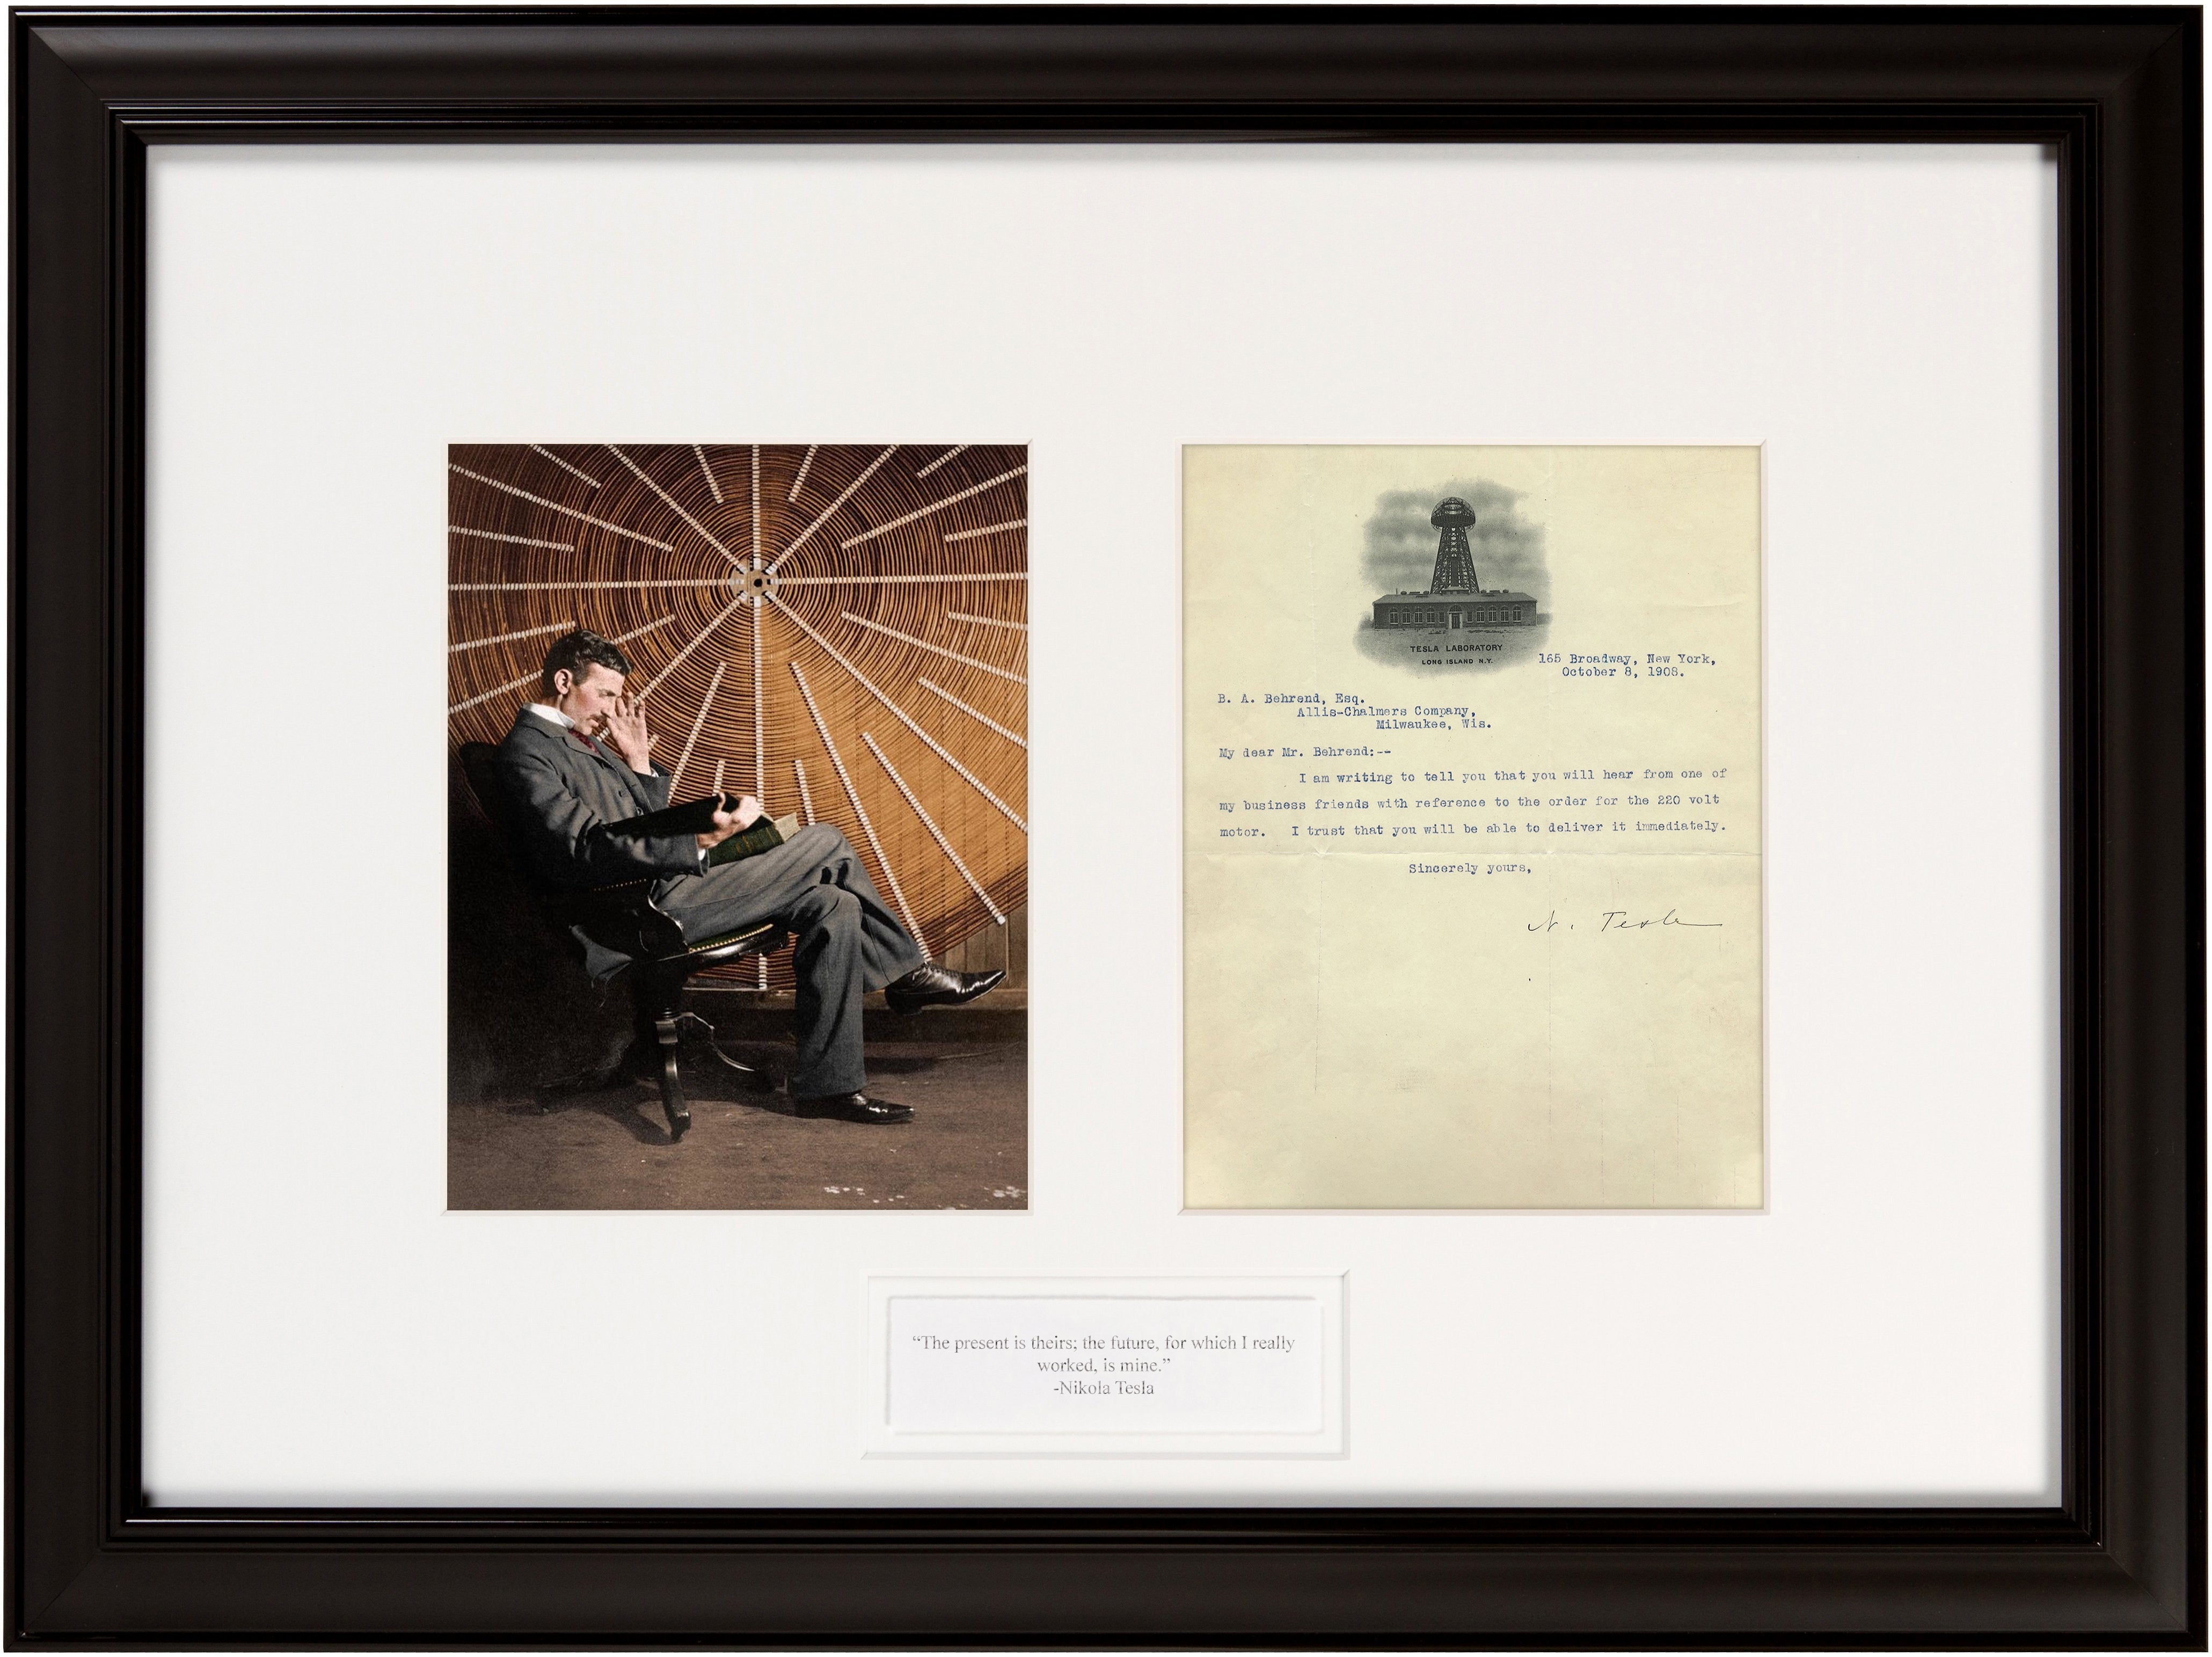 Incredibly Rare Nikola Tesla Signed 1908 Letter with Laboratory Letterhead “…the order for the 220 volt motor.”